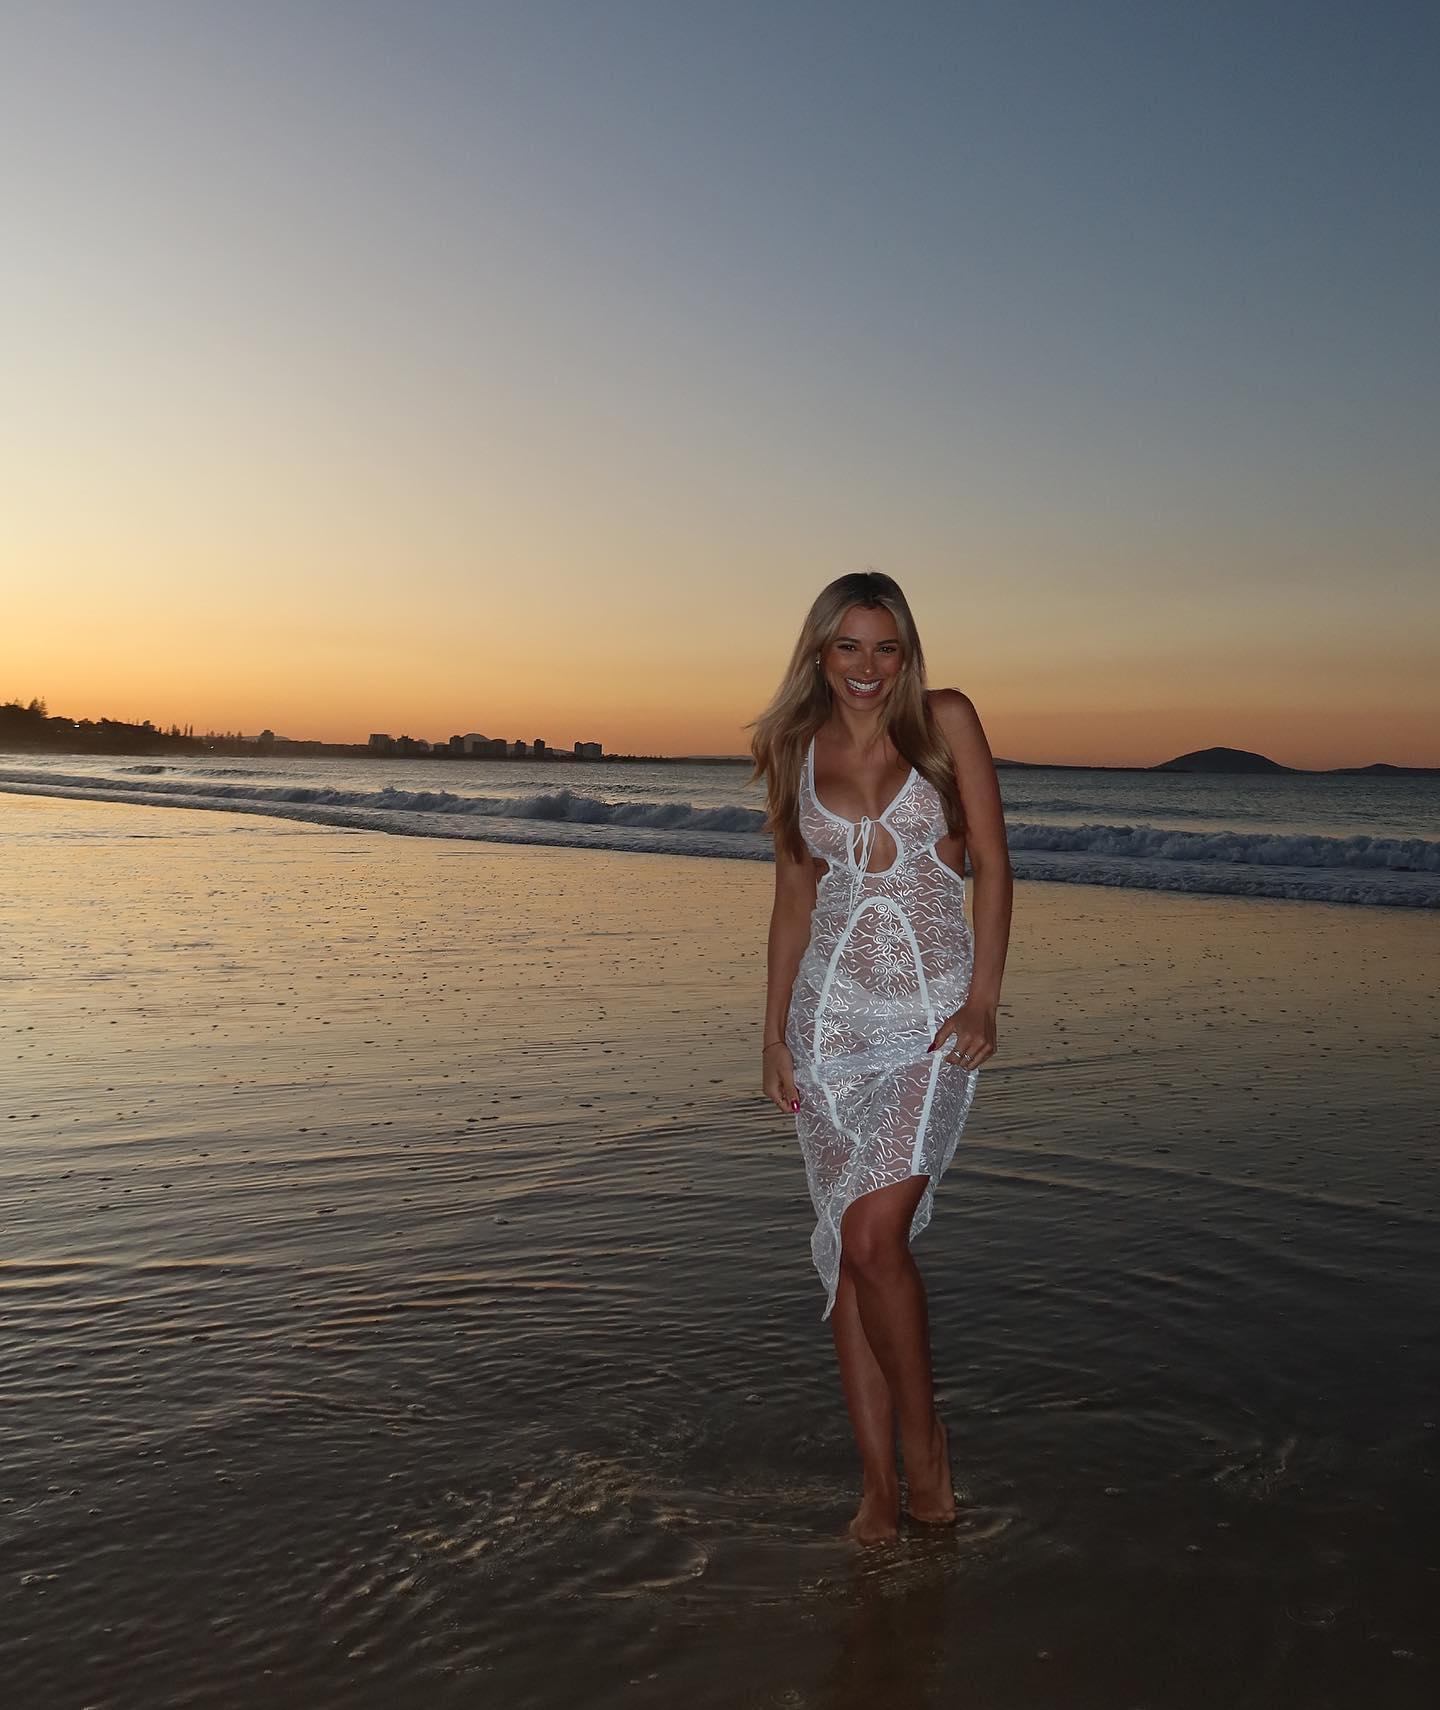 Georgia Hassarati Hits The Beach At Sunset In A See-Through Dress